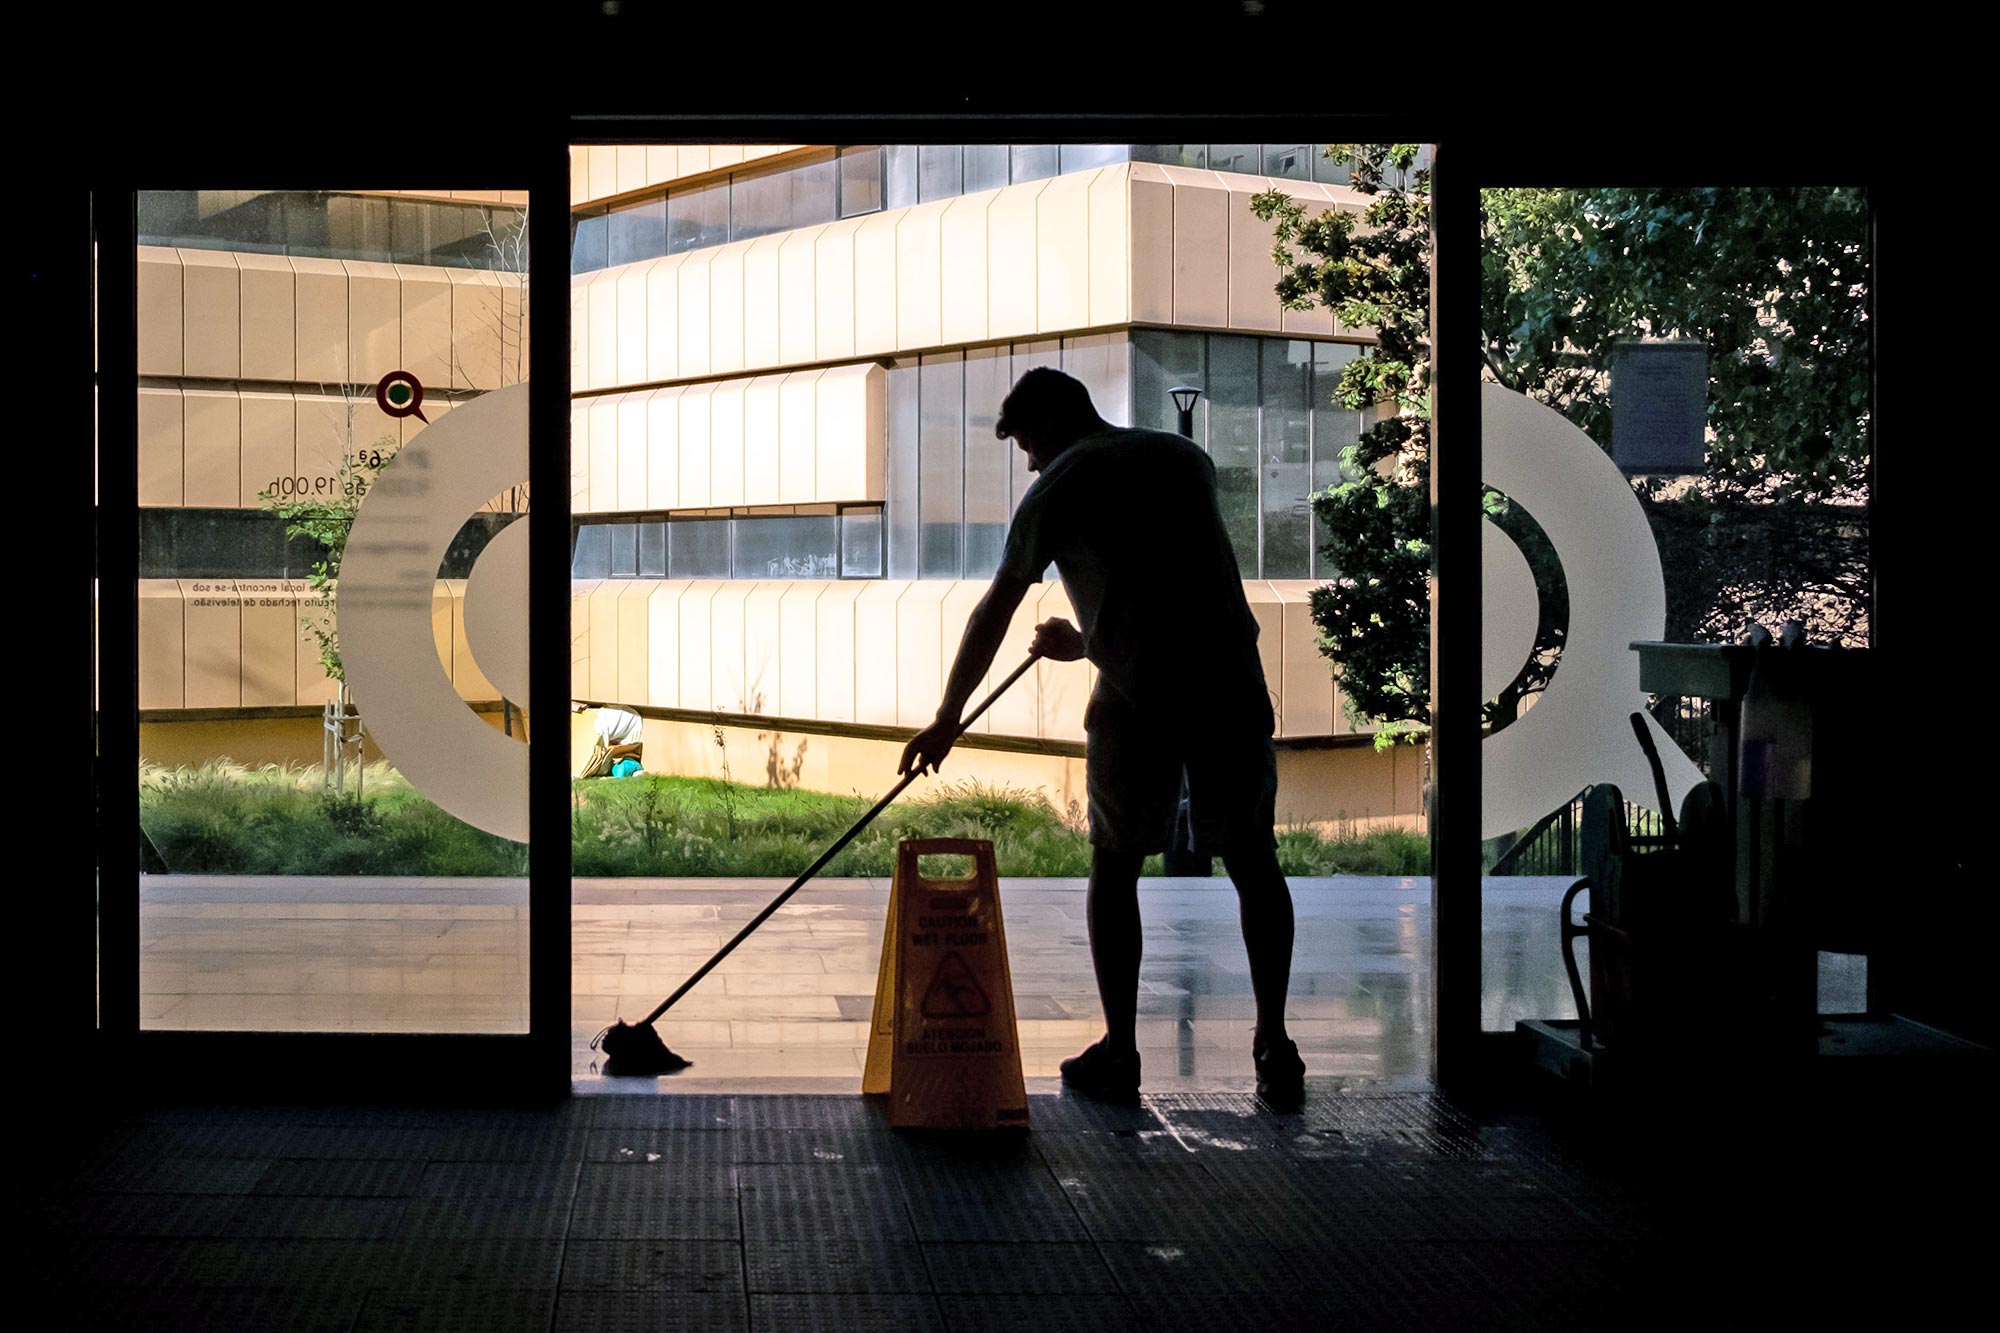 Janitor mopping floor in front of story entryway